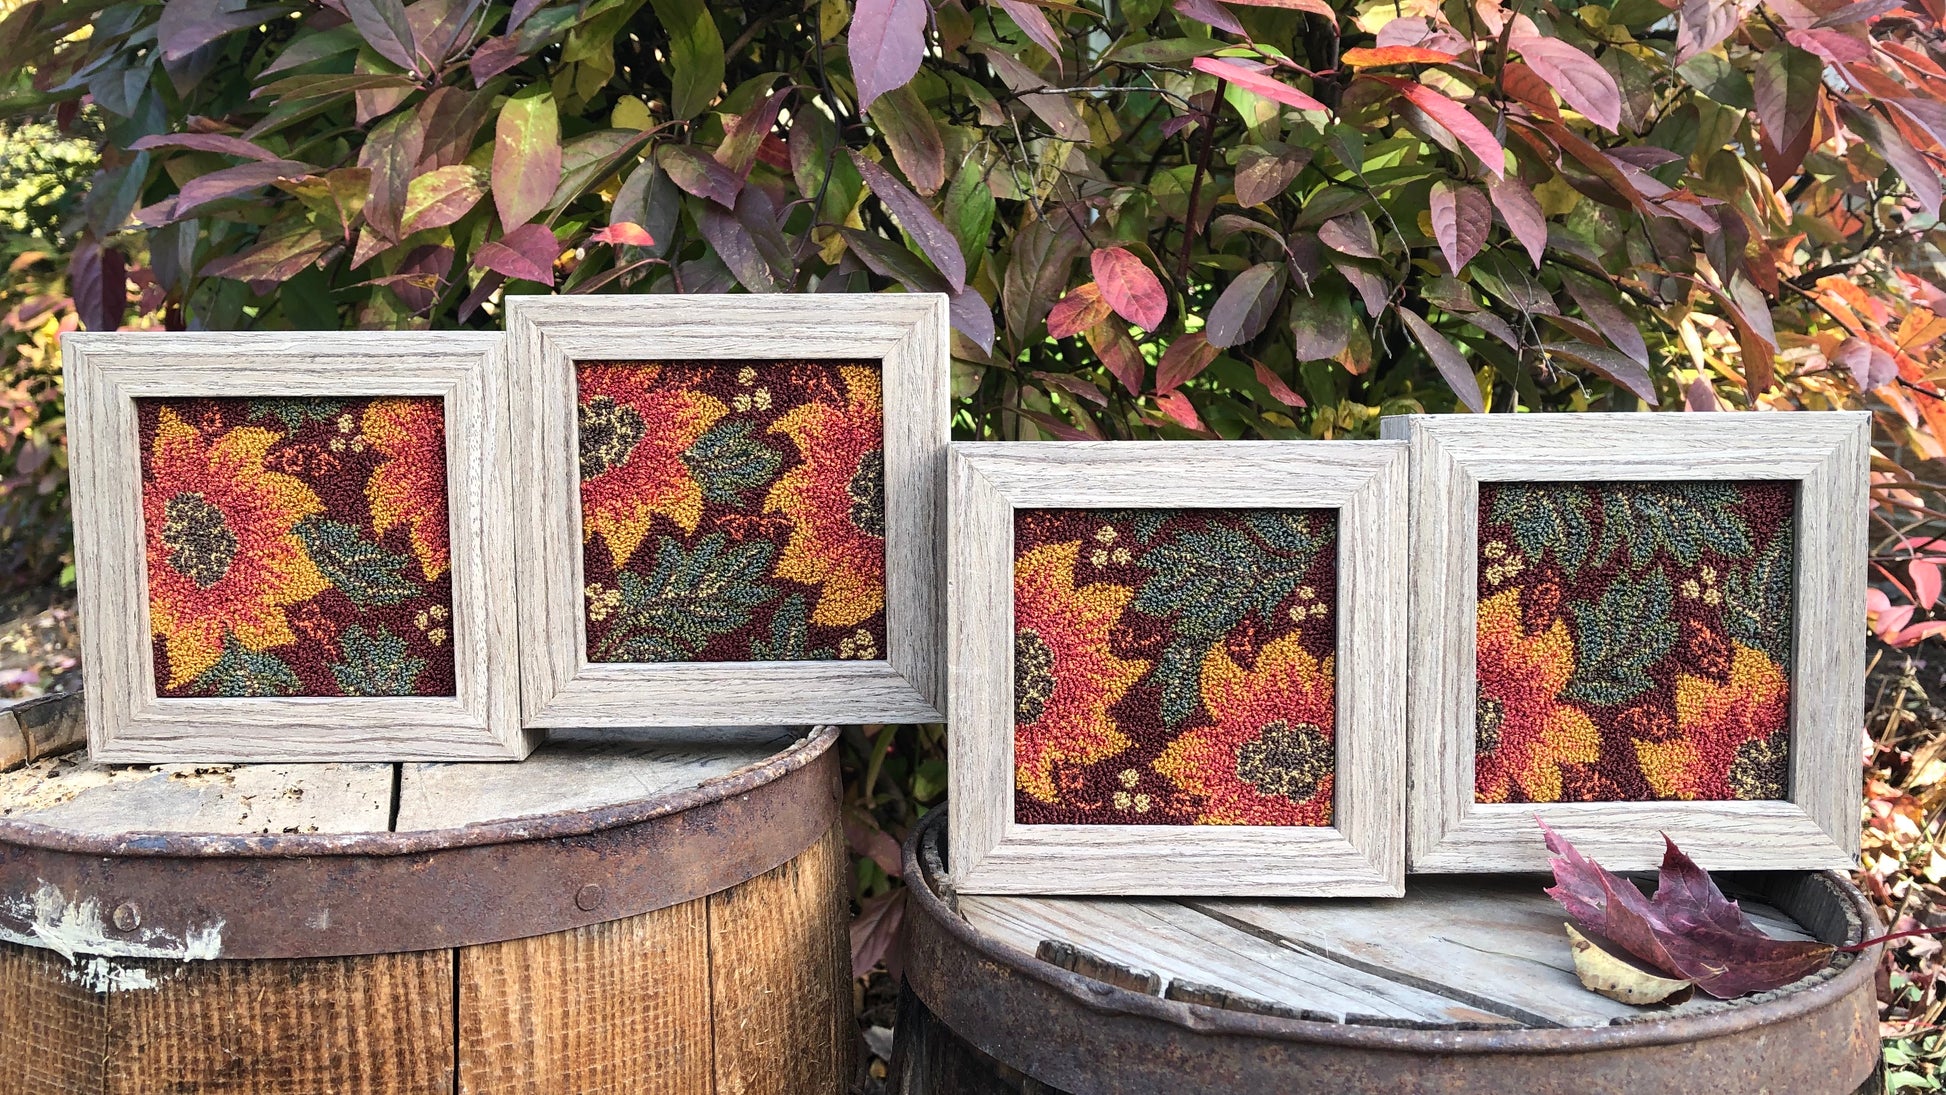  Autumn Glow- Punch Needle Pattern (set of 4) with DMC thread Kit by Orphaned Wool. This is a lovely set of 4 punch needle pattern designed to fit into a 4 x 4 frames. Copyright 2021 Kelly Kanyok- All Rights Reserved.